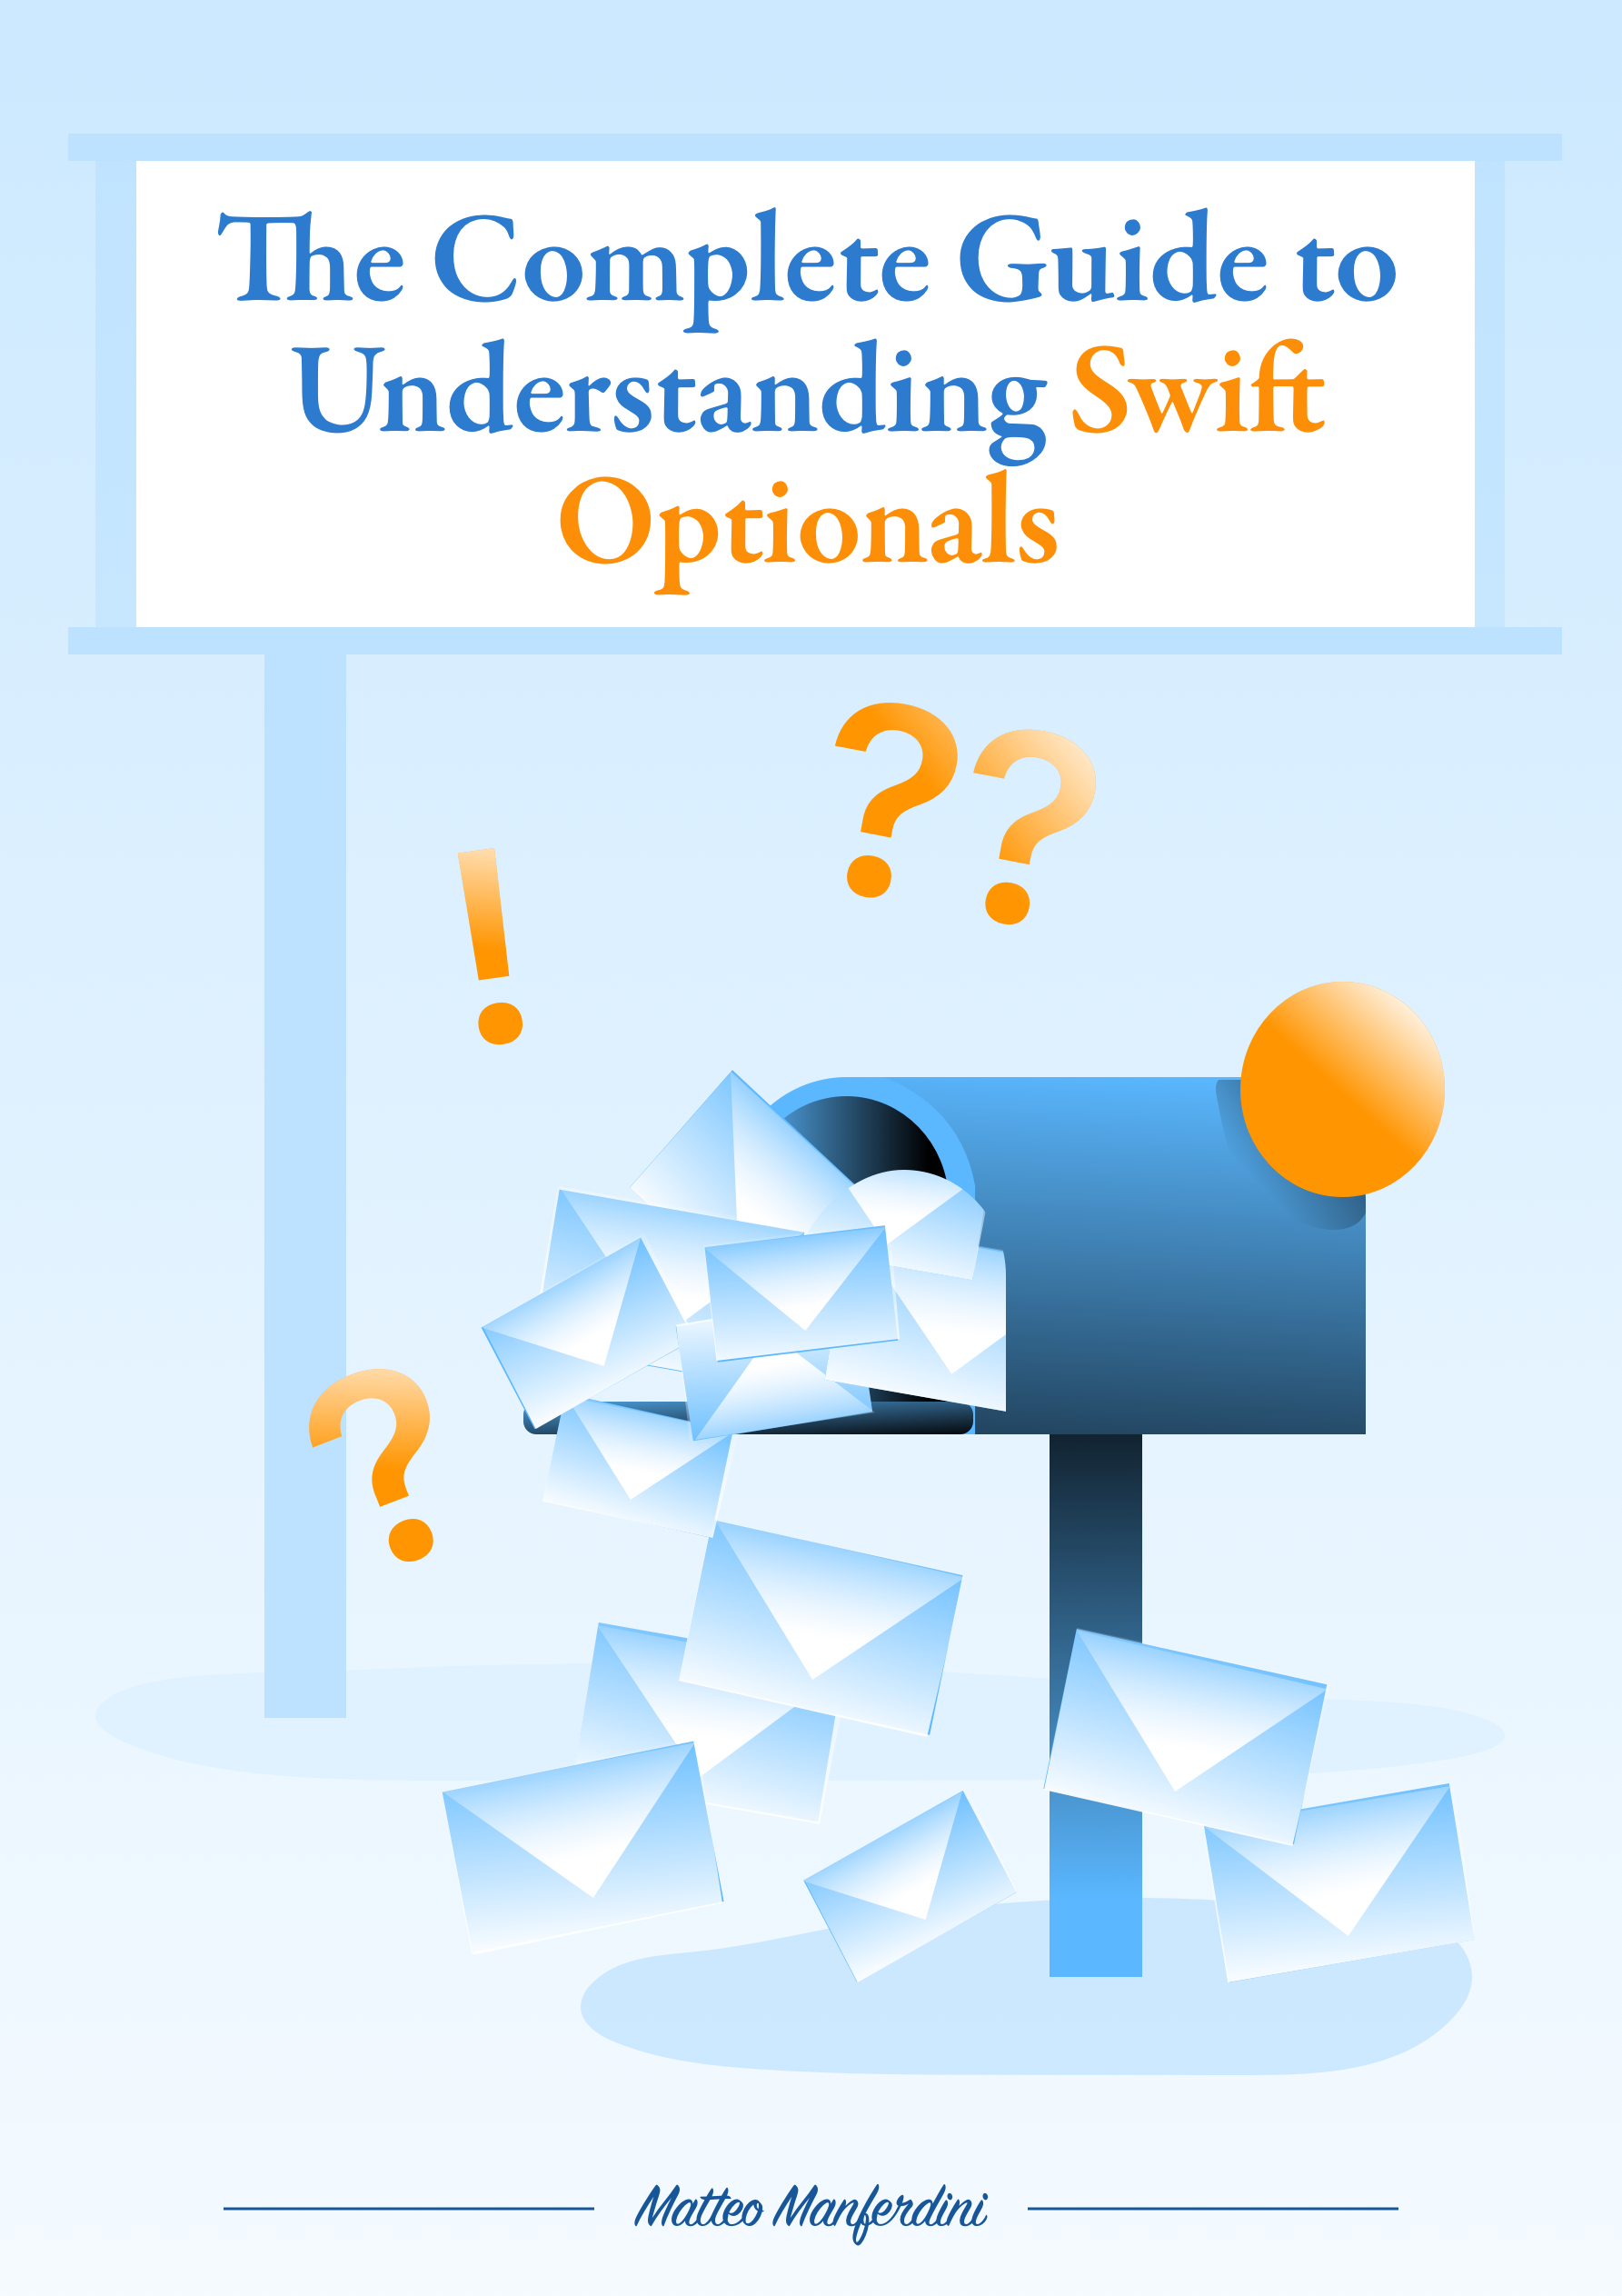 The Complete Guide to Understanding Swift Optionals